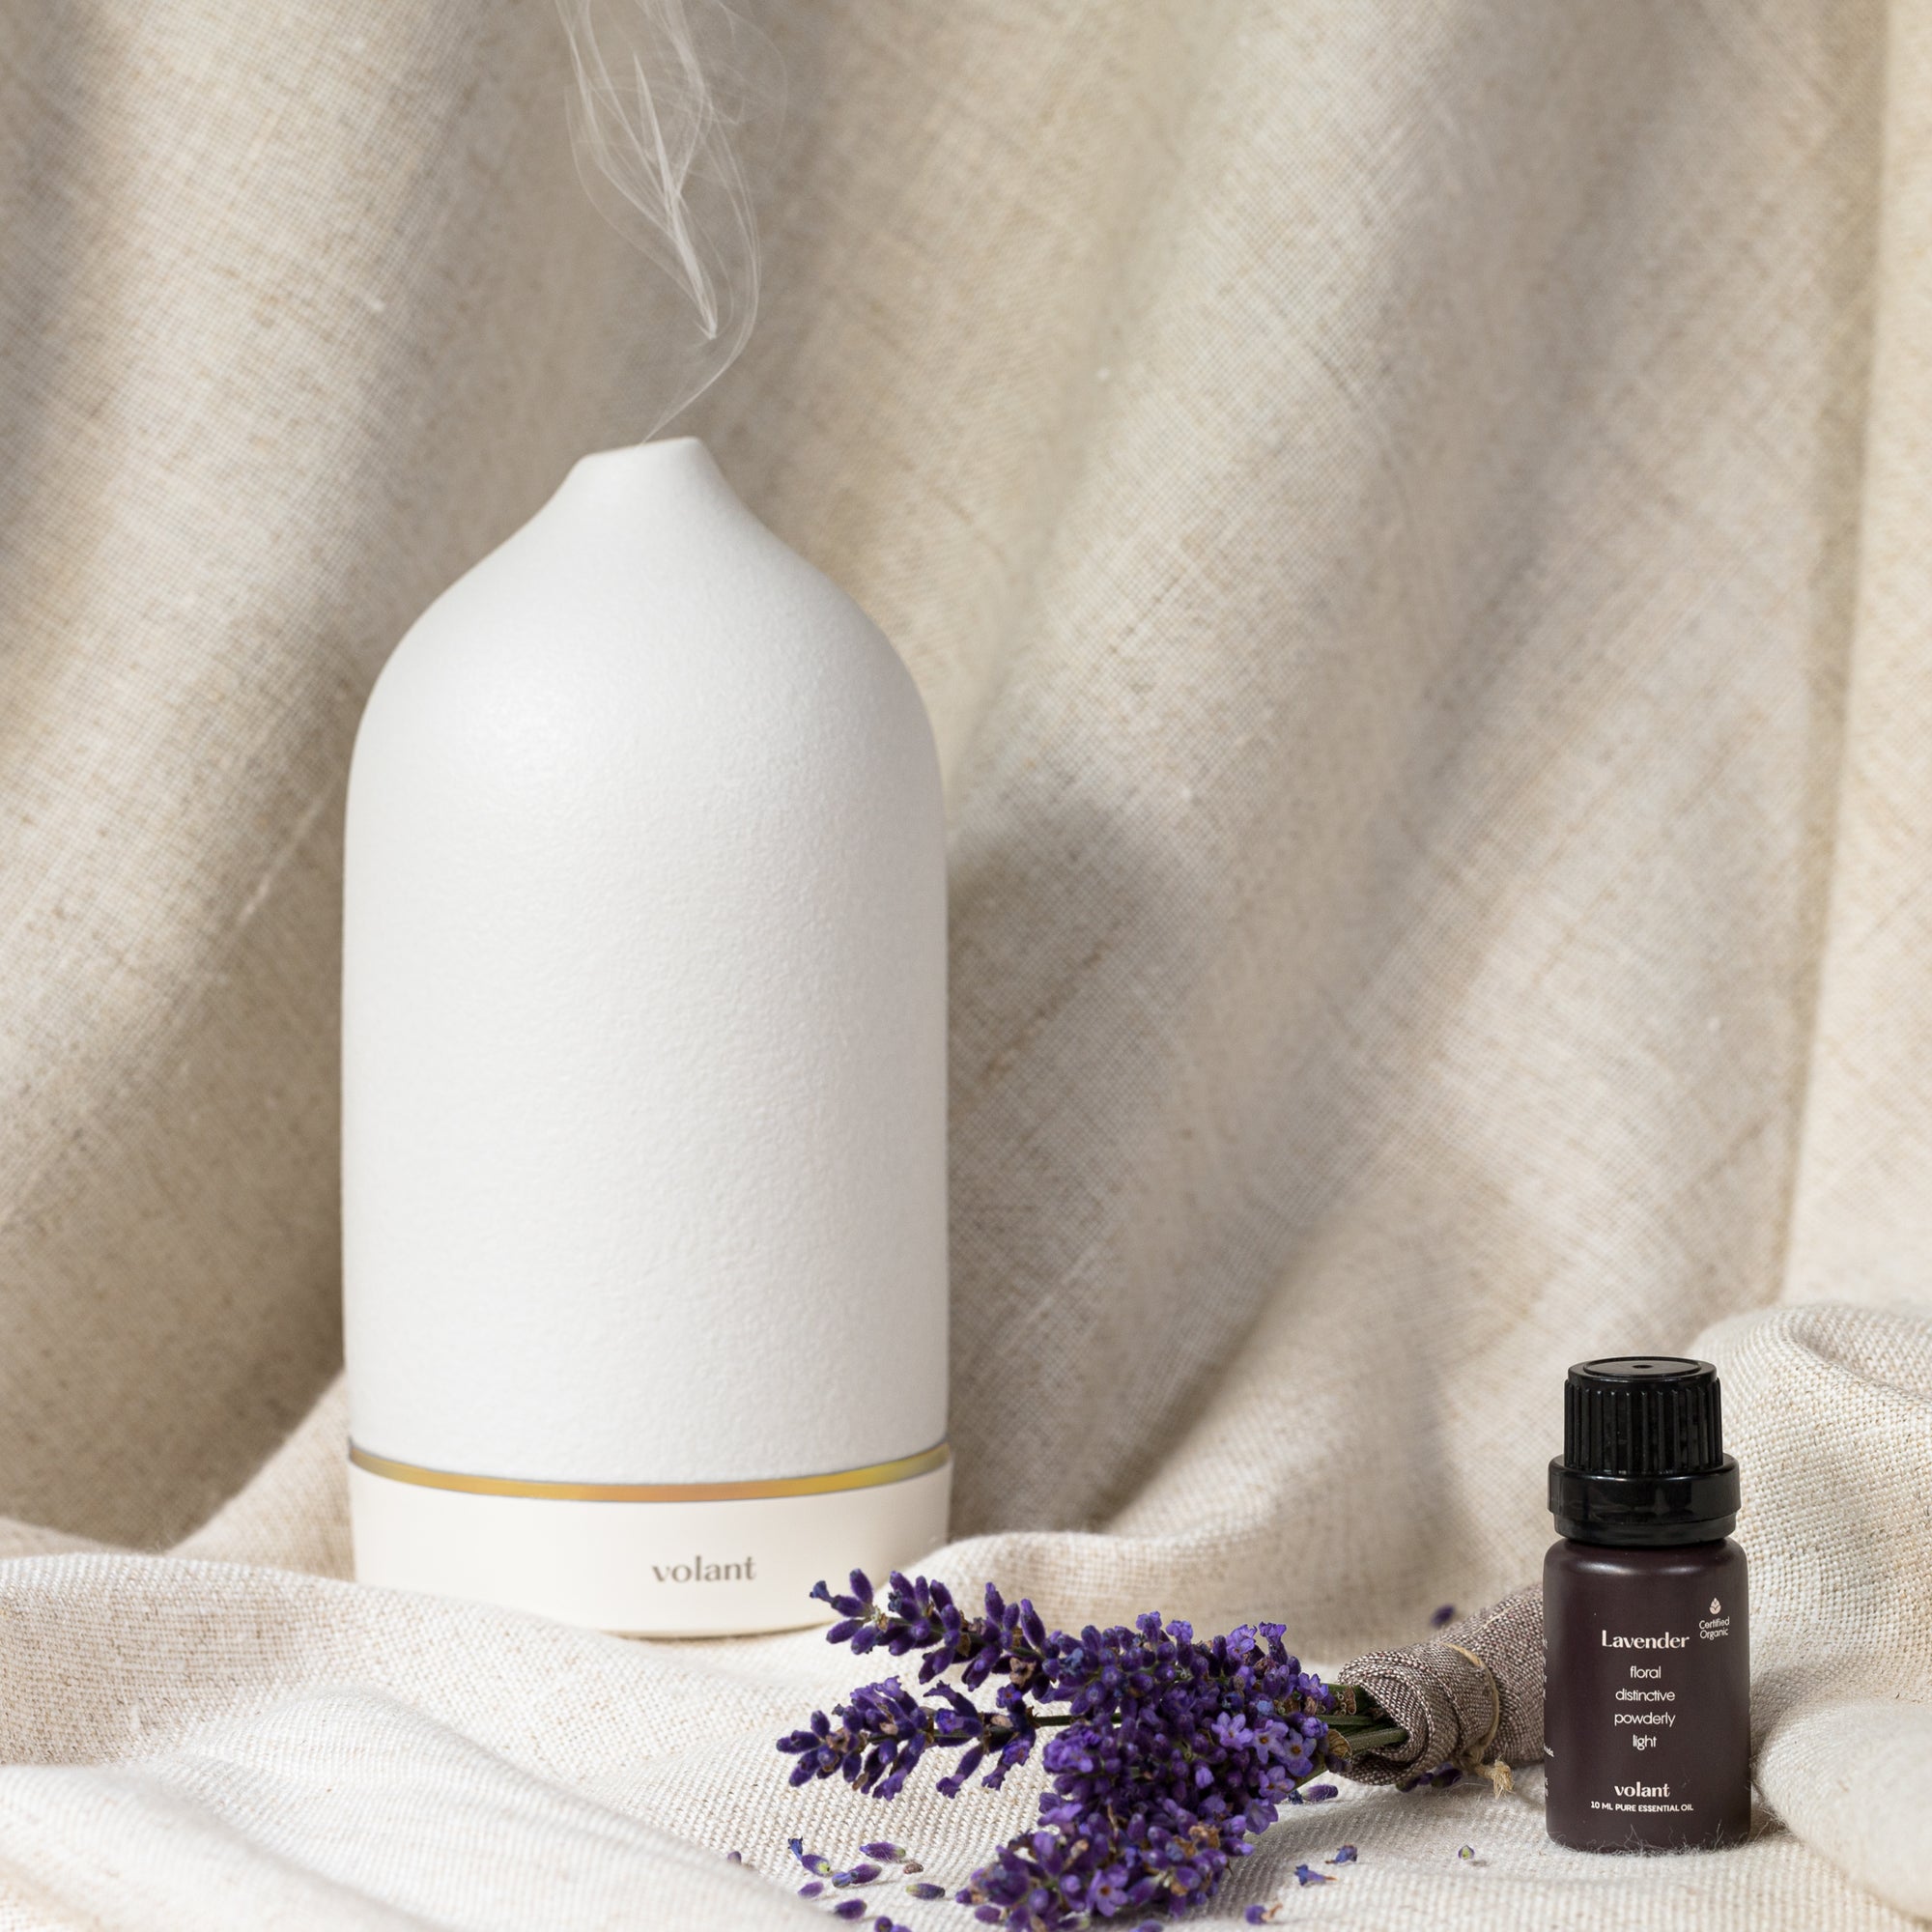 volant white diffuser using organic lavender essential oil promoting relaxation and better sleep